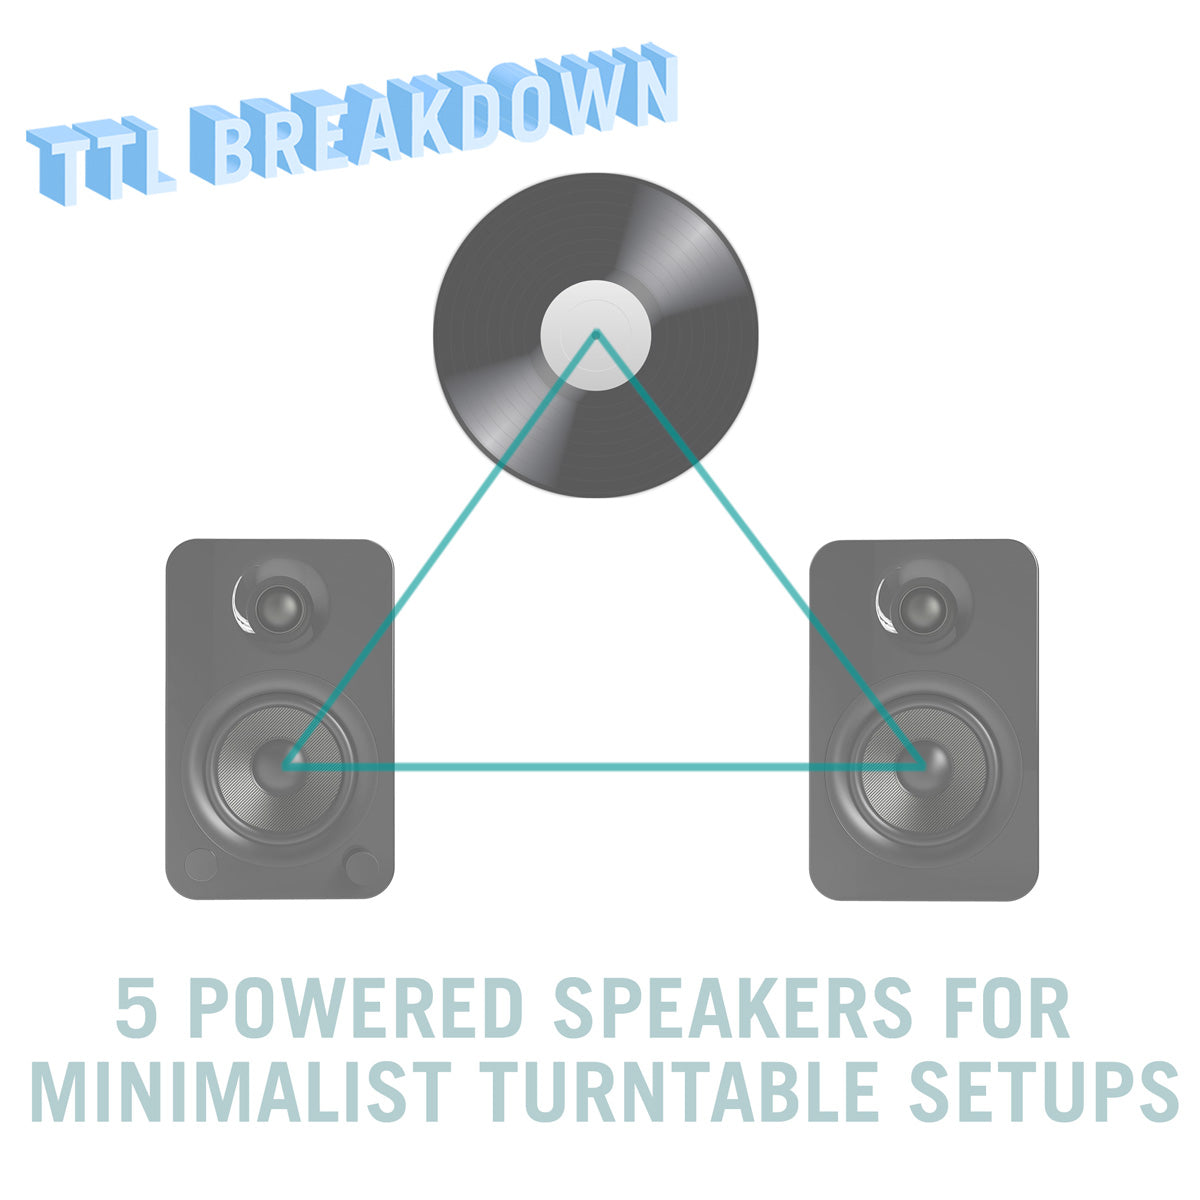 Speakers for Turntables Guide